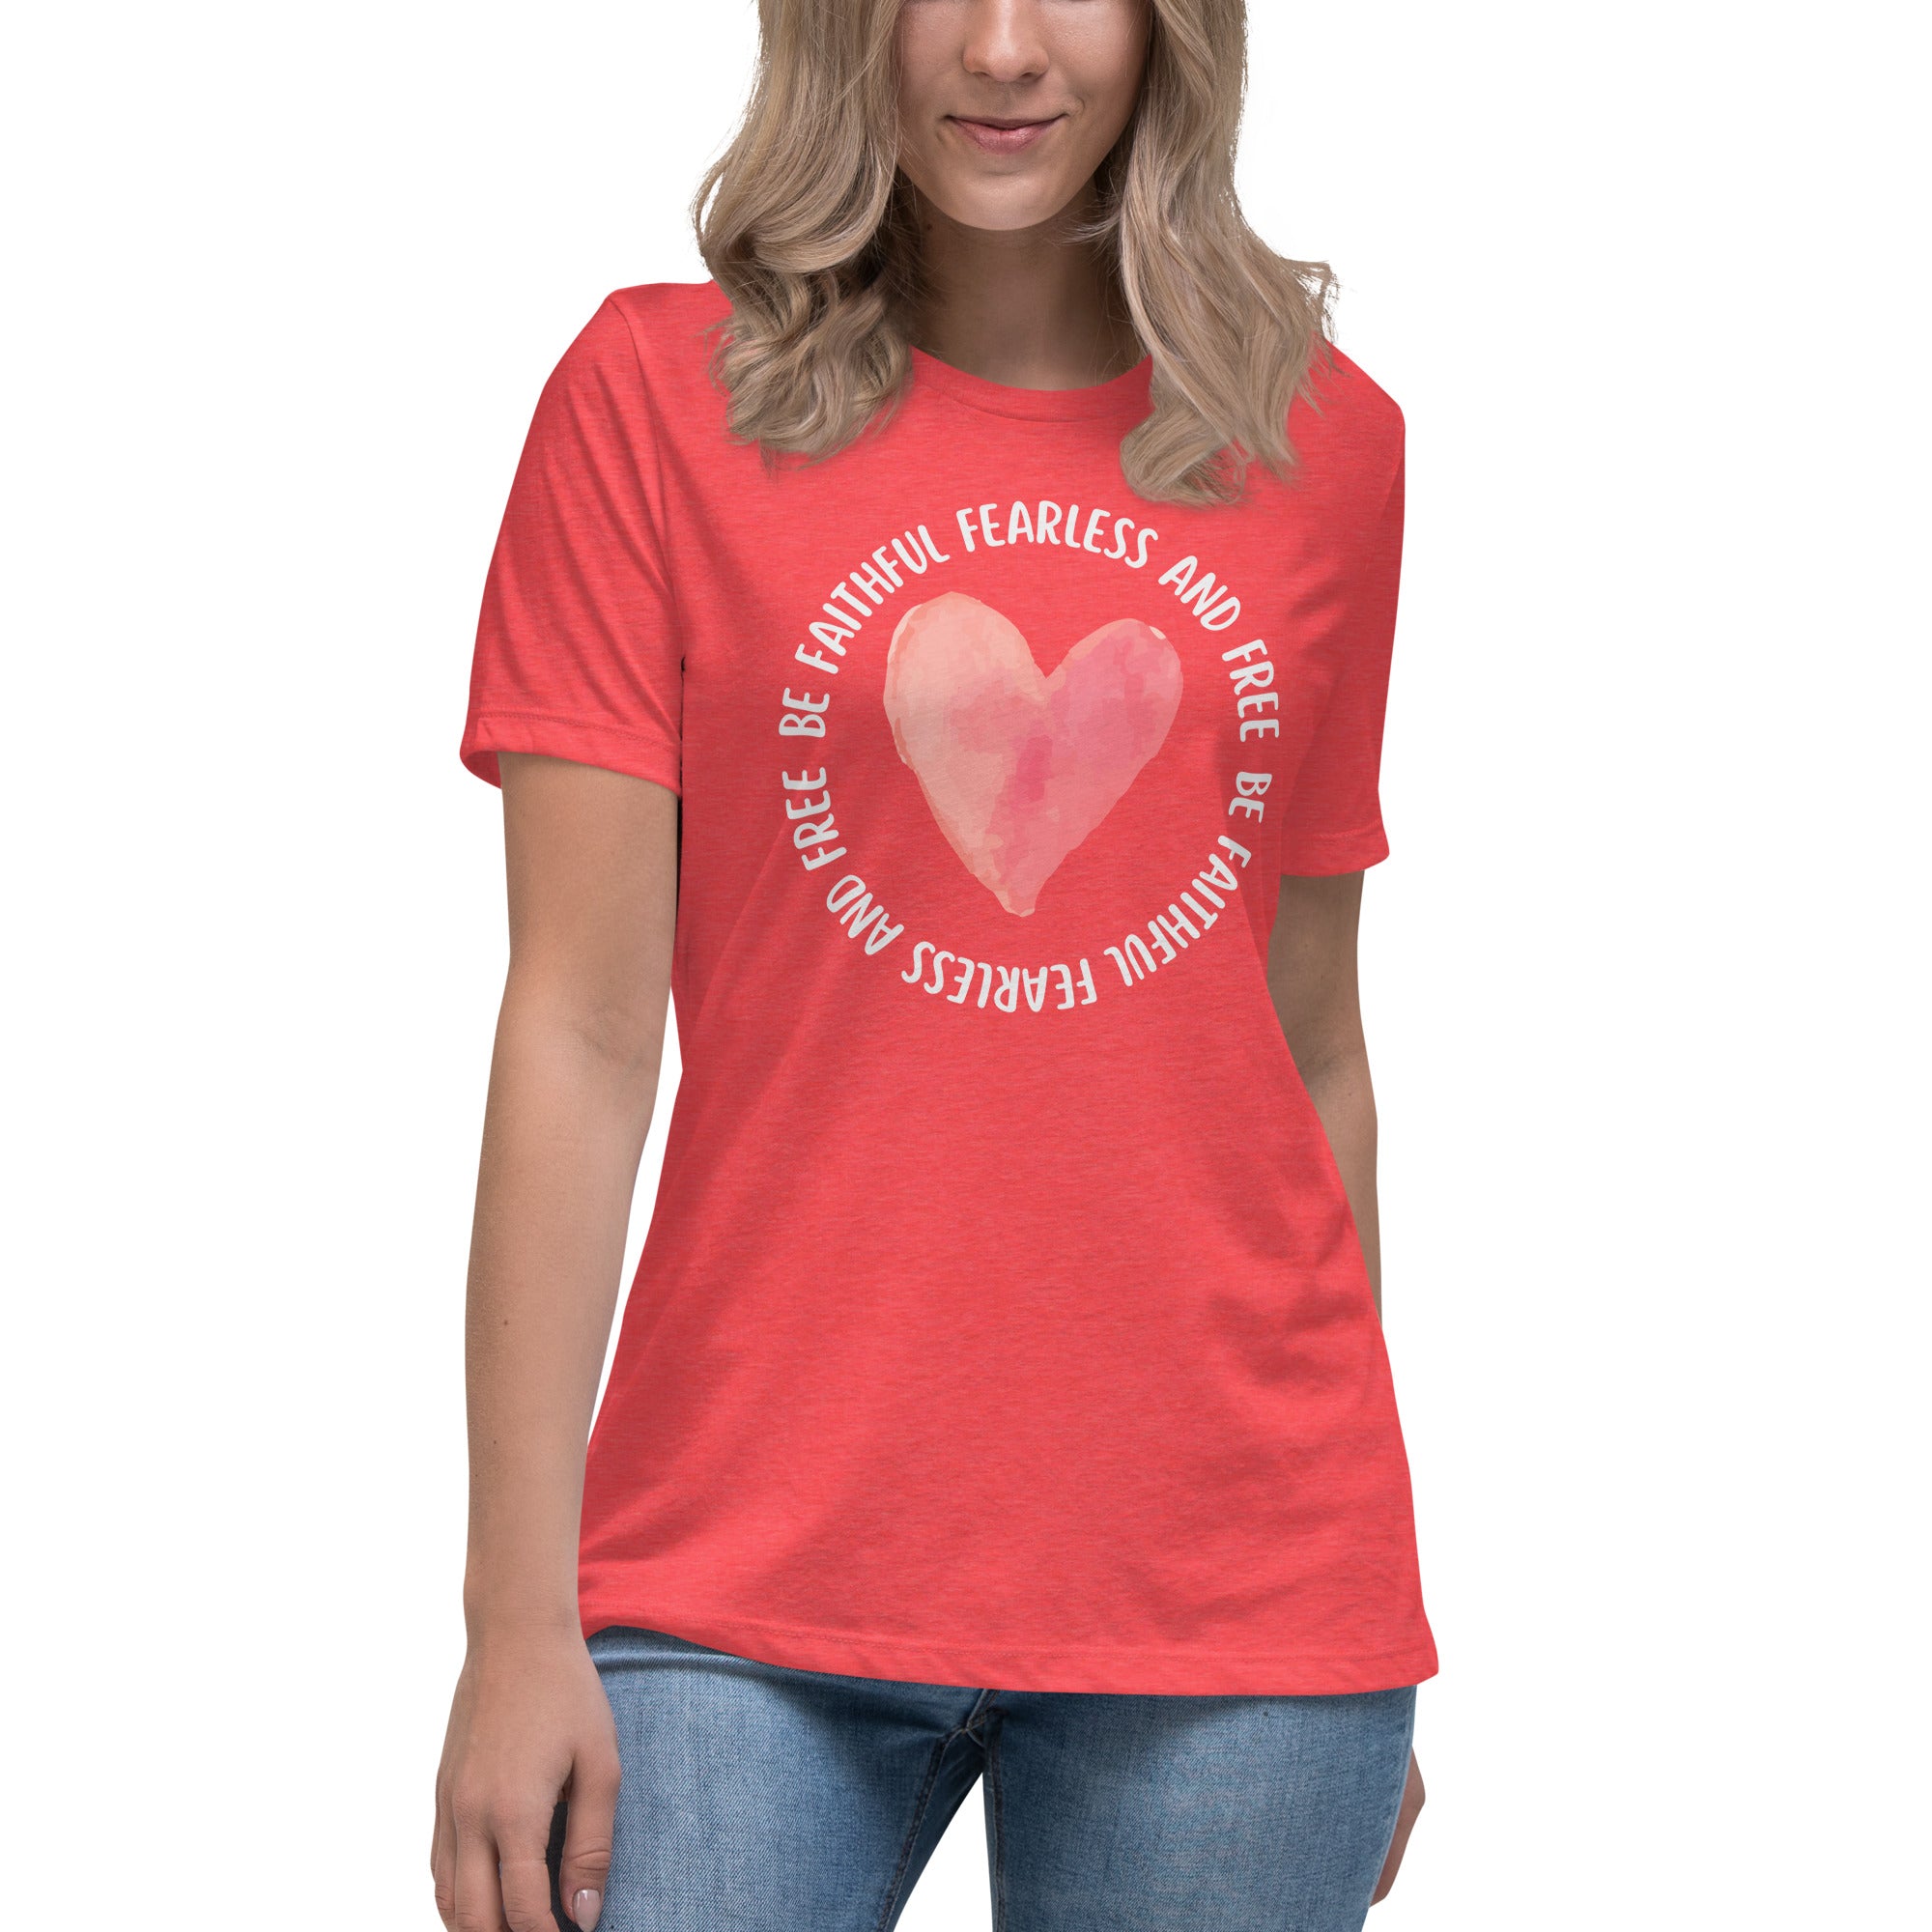 Be Faithful Fearless And Free Women's Relaxed T-Shirt